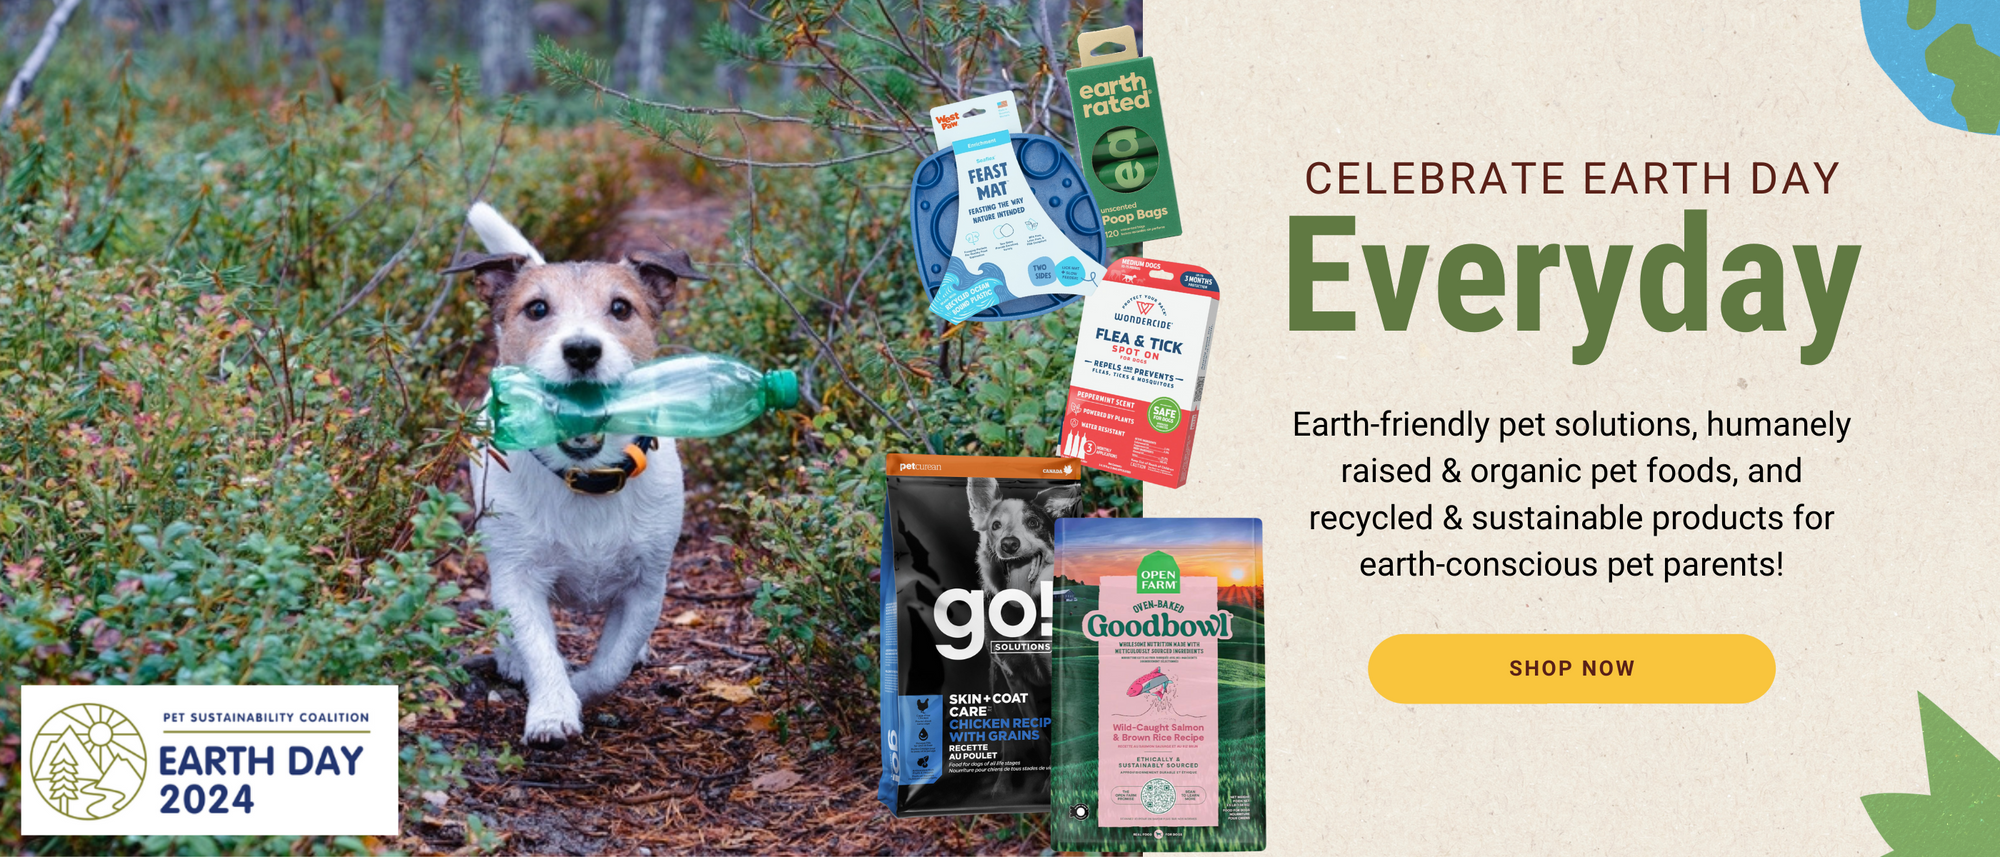 Celebrate Earth Day, Everyday! Earth-friendly pet solutions, humanely raised & organic pet food, and recycled & sustainable products for earth-conscious pet pet parents! Shop now!